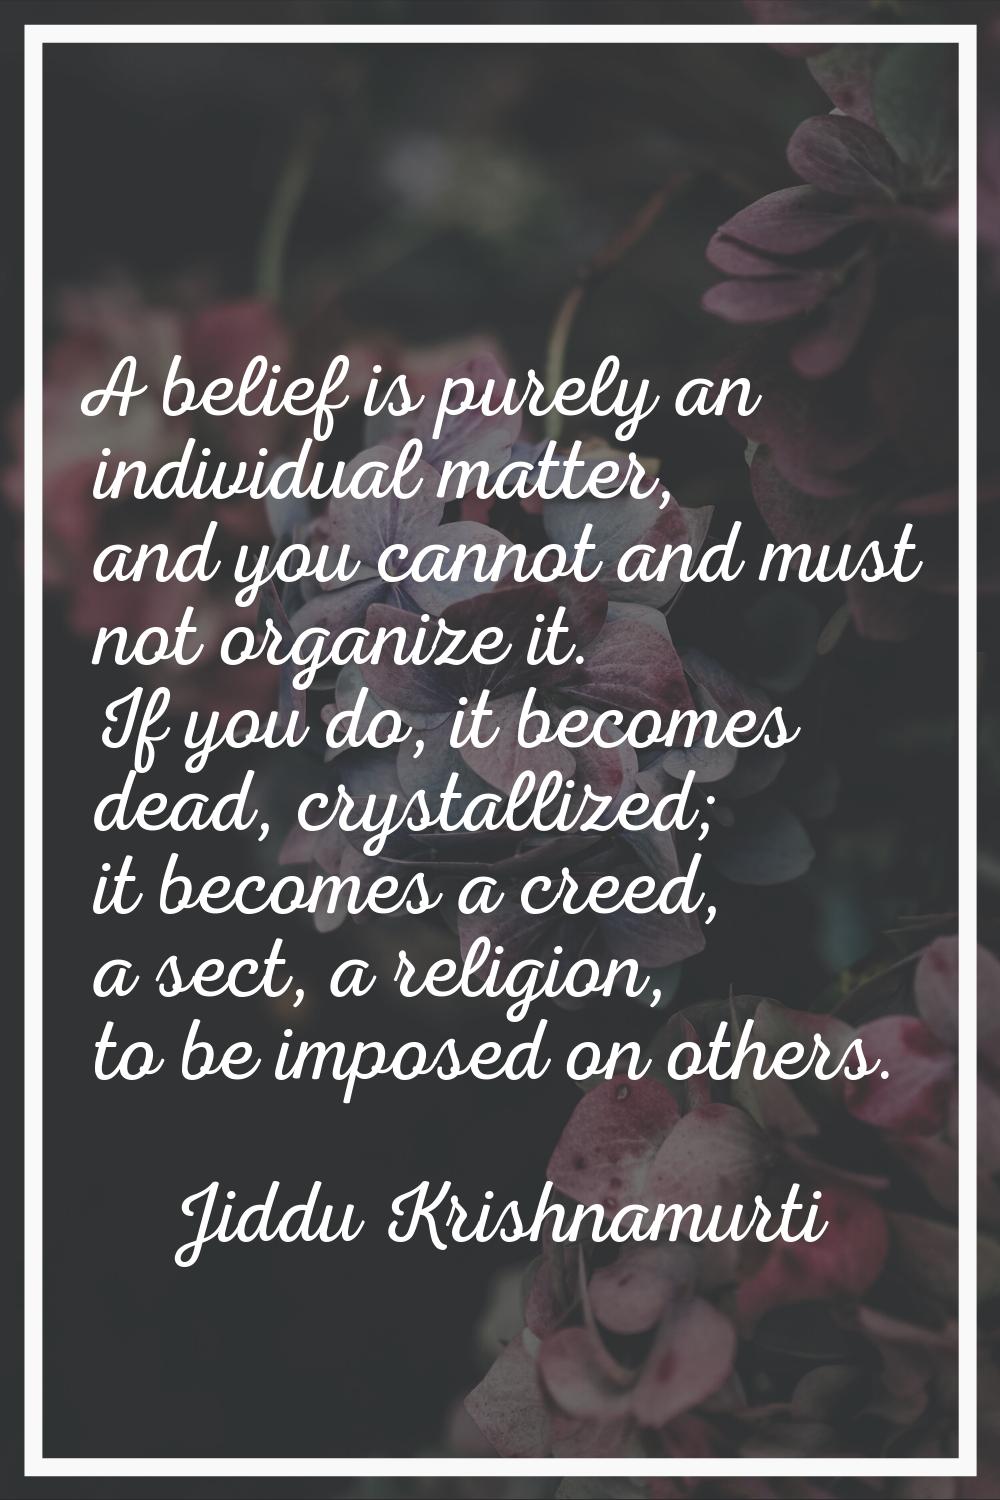 A belief is purely an individual matter, and you cannot and must not organize it. If you do, it bec